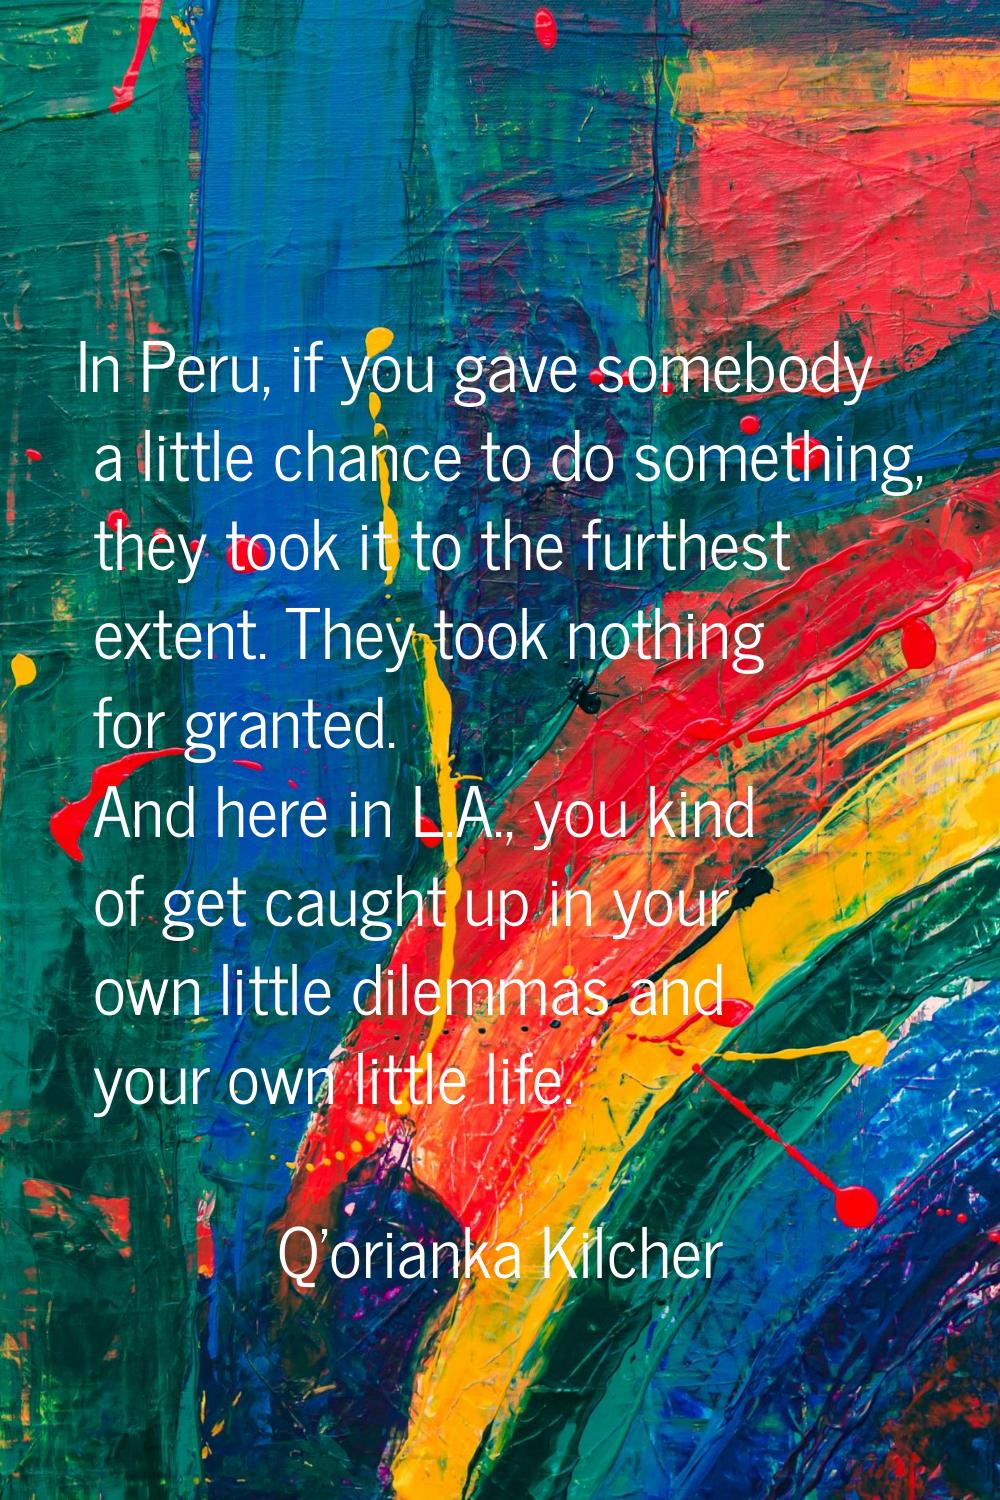 In Peru, if you gave somebody a little chance to do something, they took it to the furthest extent.